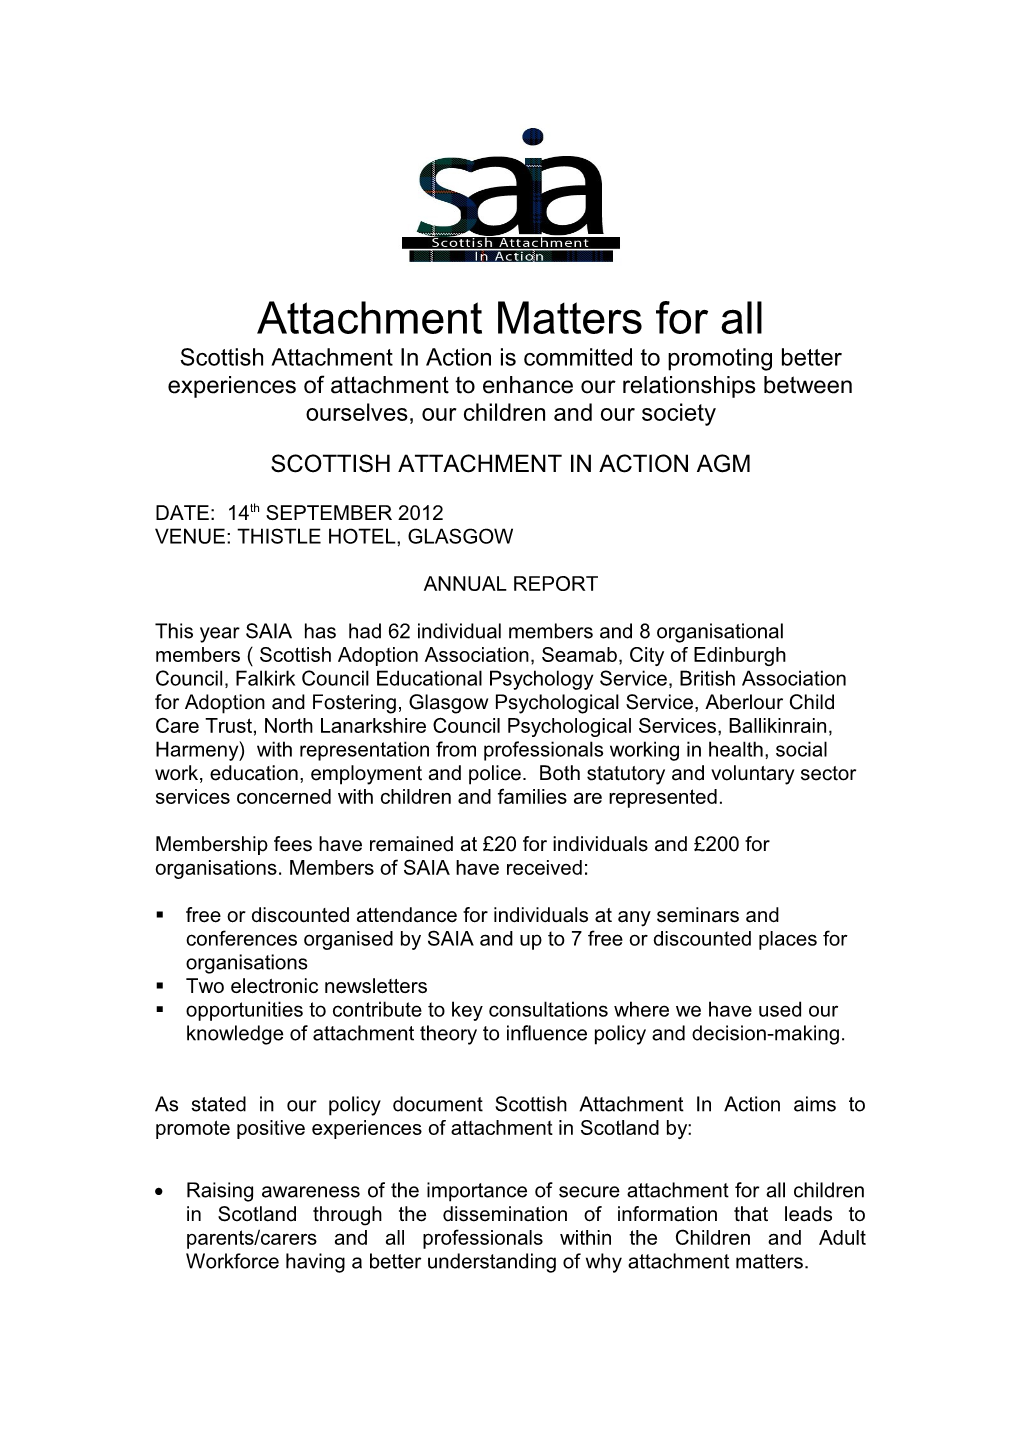 Attachment Matters for All